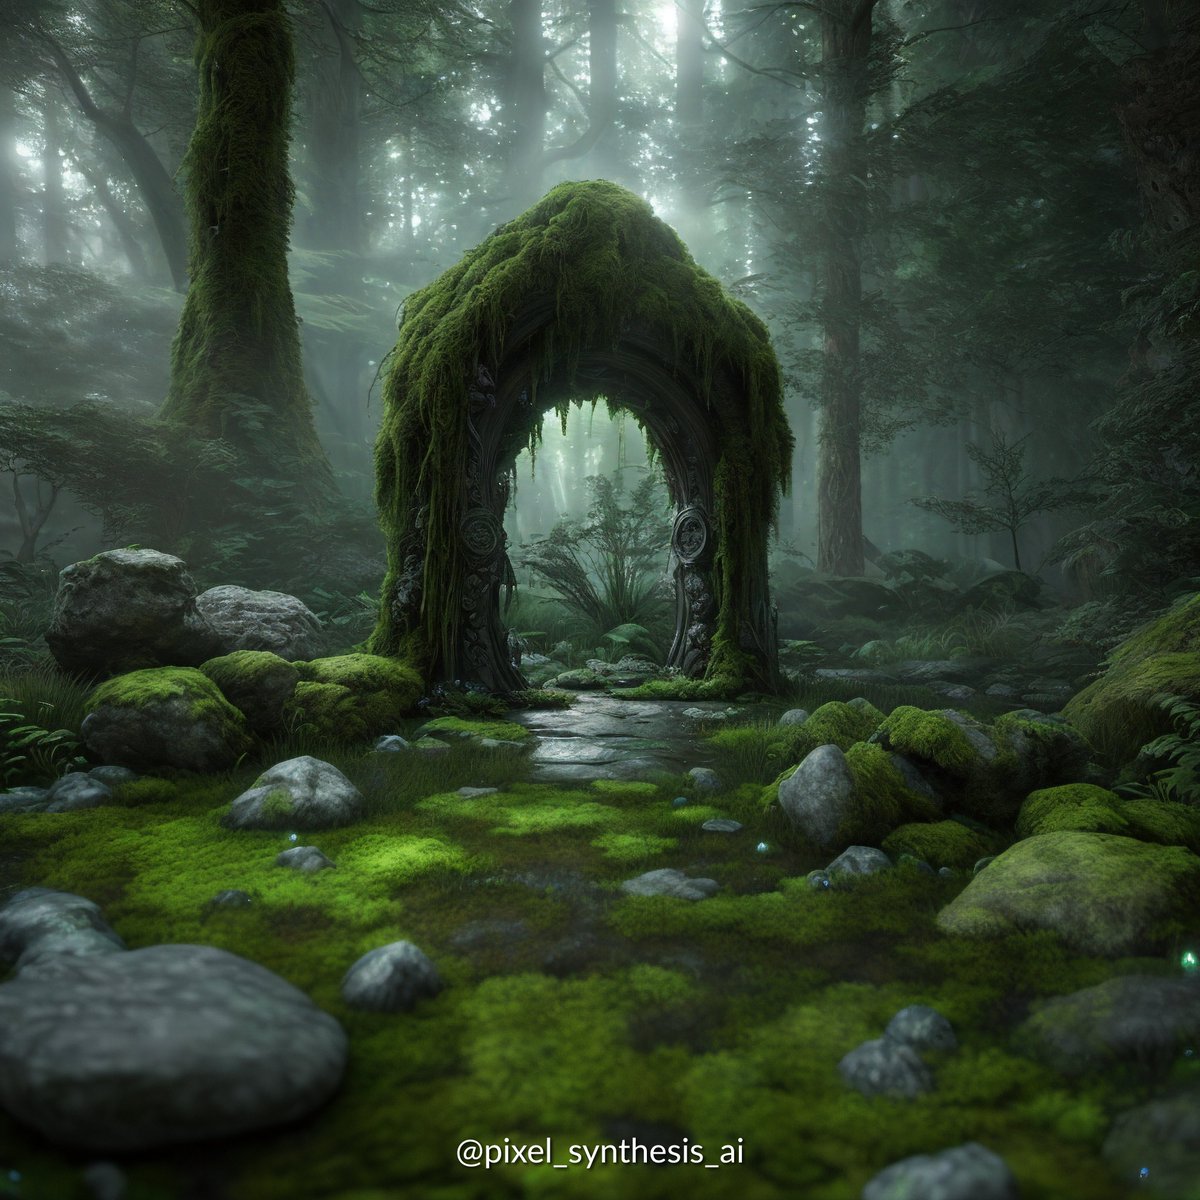 Embark on an ethereal journey through 'Mystical Portal', rendered by AI 🌿✨.

#aiart #aigeneratedart #stablediffusionart #sdxl #huggingface #openai #chatgpt #civitai #airender #digitalart #masterpiece #aiimage #aiimagery #nature #forest #magicalportal #aiartist #aiartistry